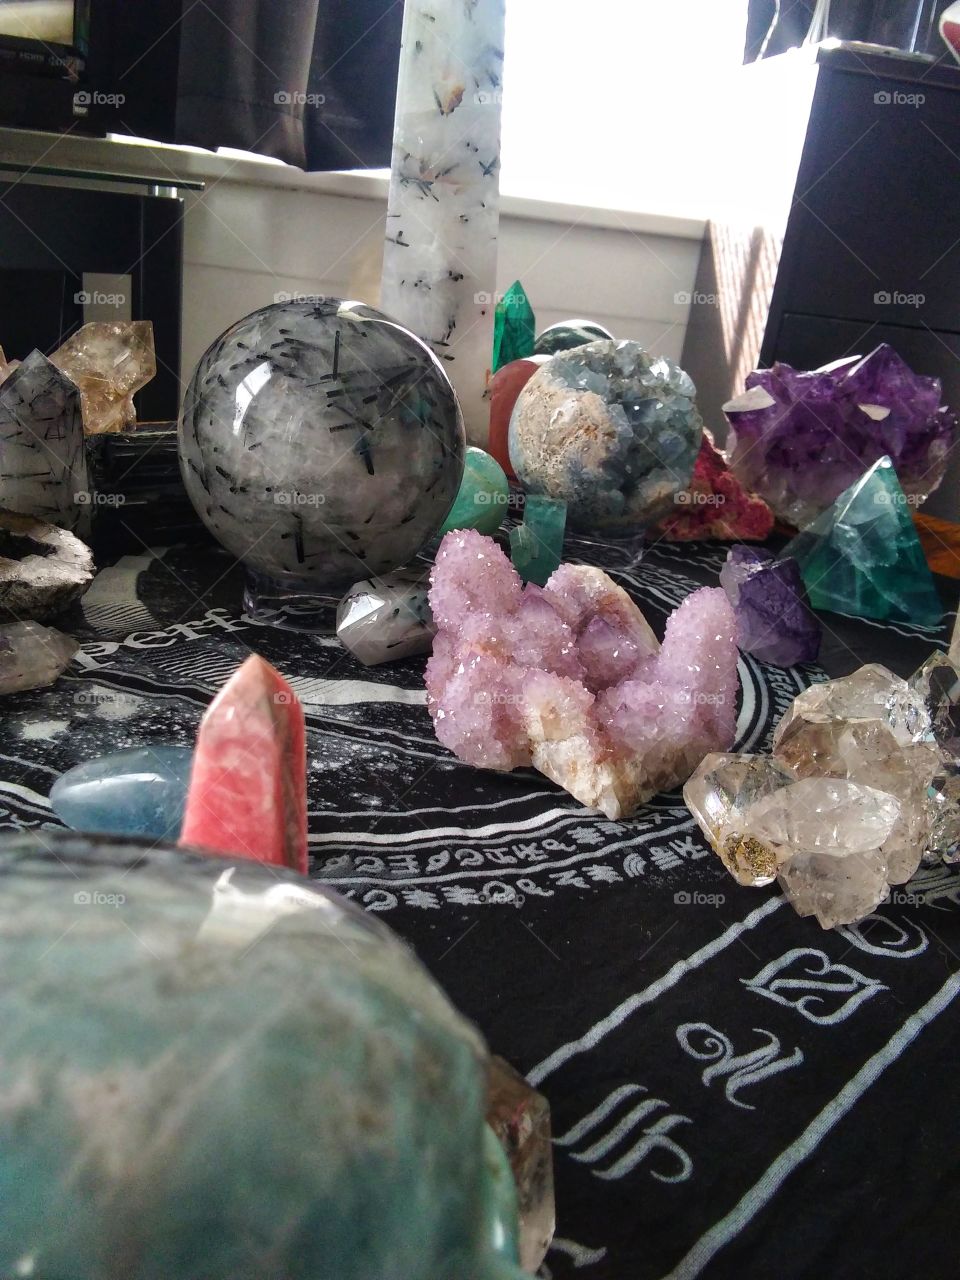 So many sparkly, colorful crystals! You can never have too many! These are from my personal collection.